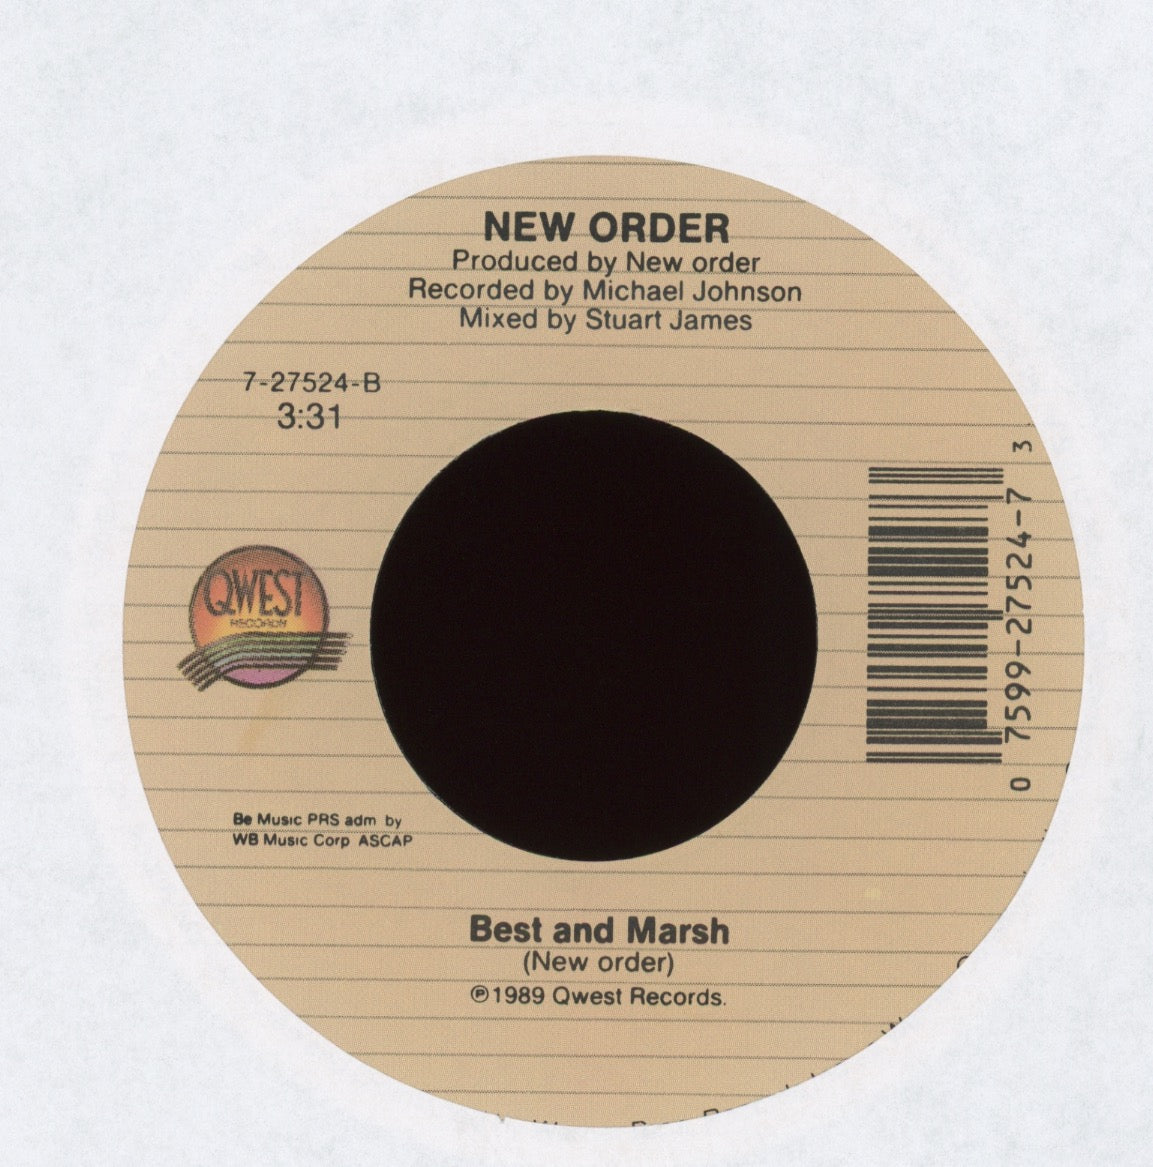 New Order - Round & round on Qwest With Picture Sleeve